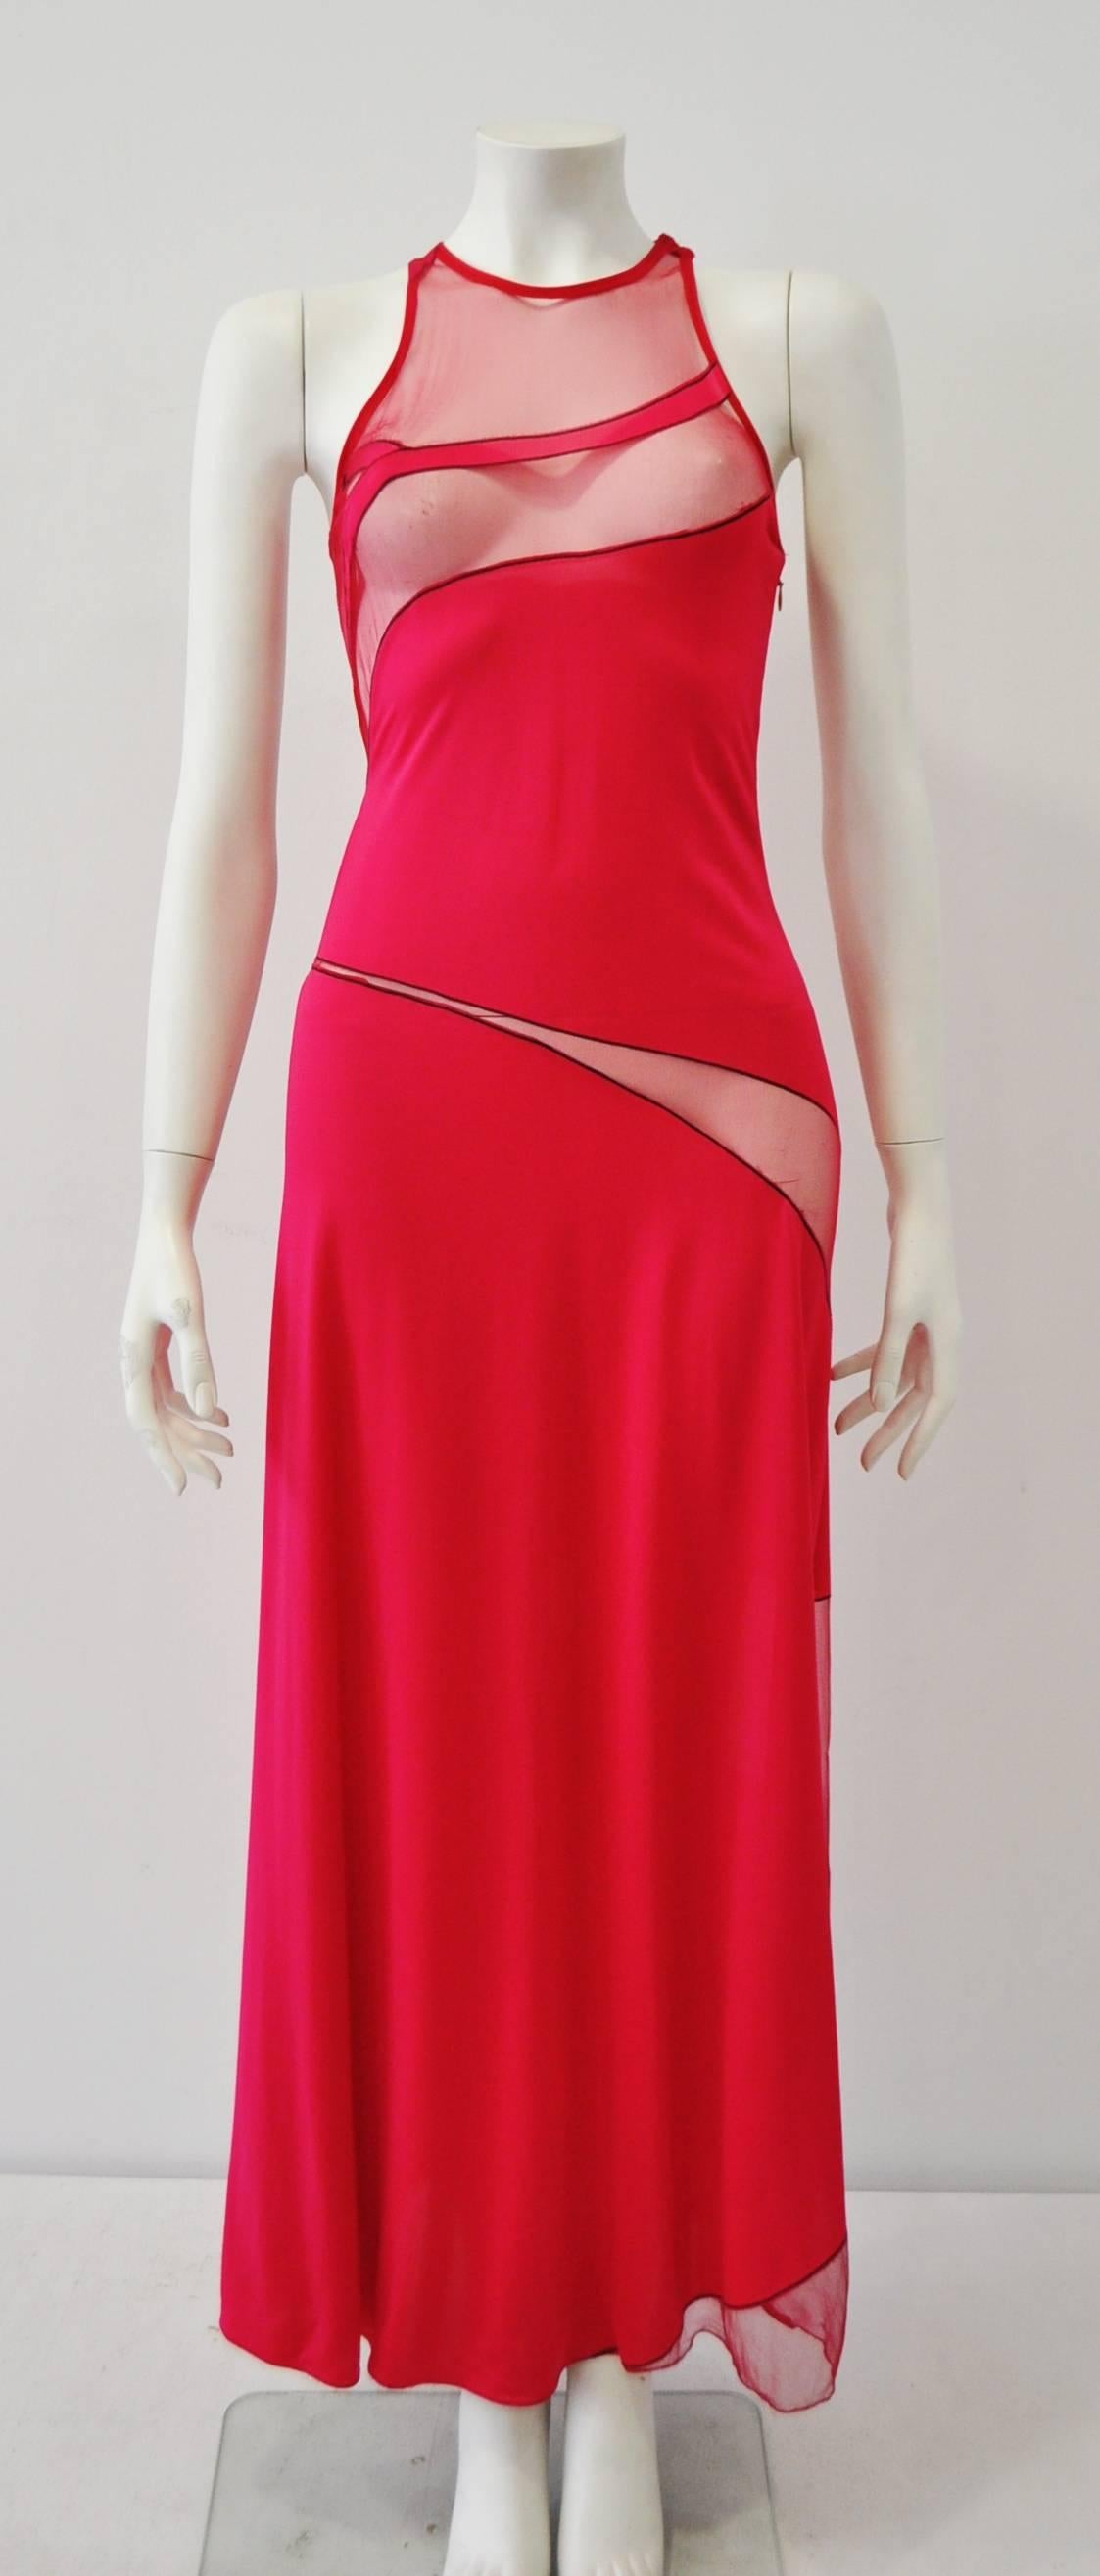 Gianni Versace Couture Cut-Out Sheer Fluorescent Raspberry Silk Jersey Evening Gown, 1996